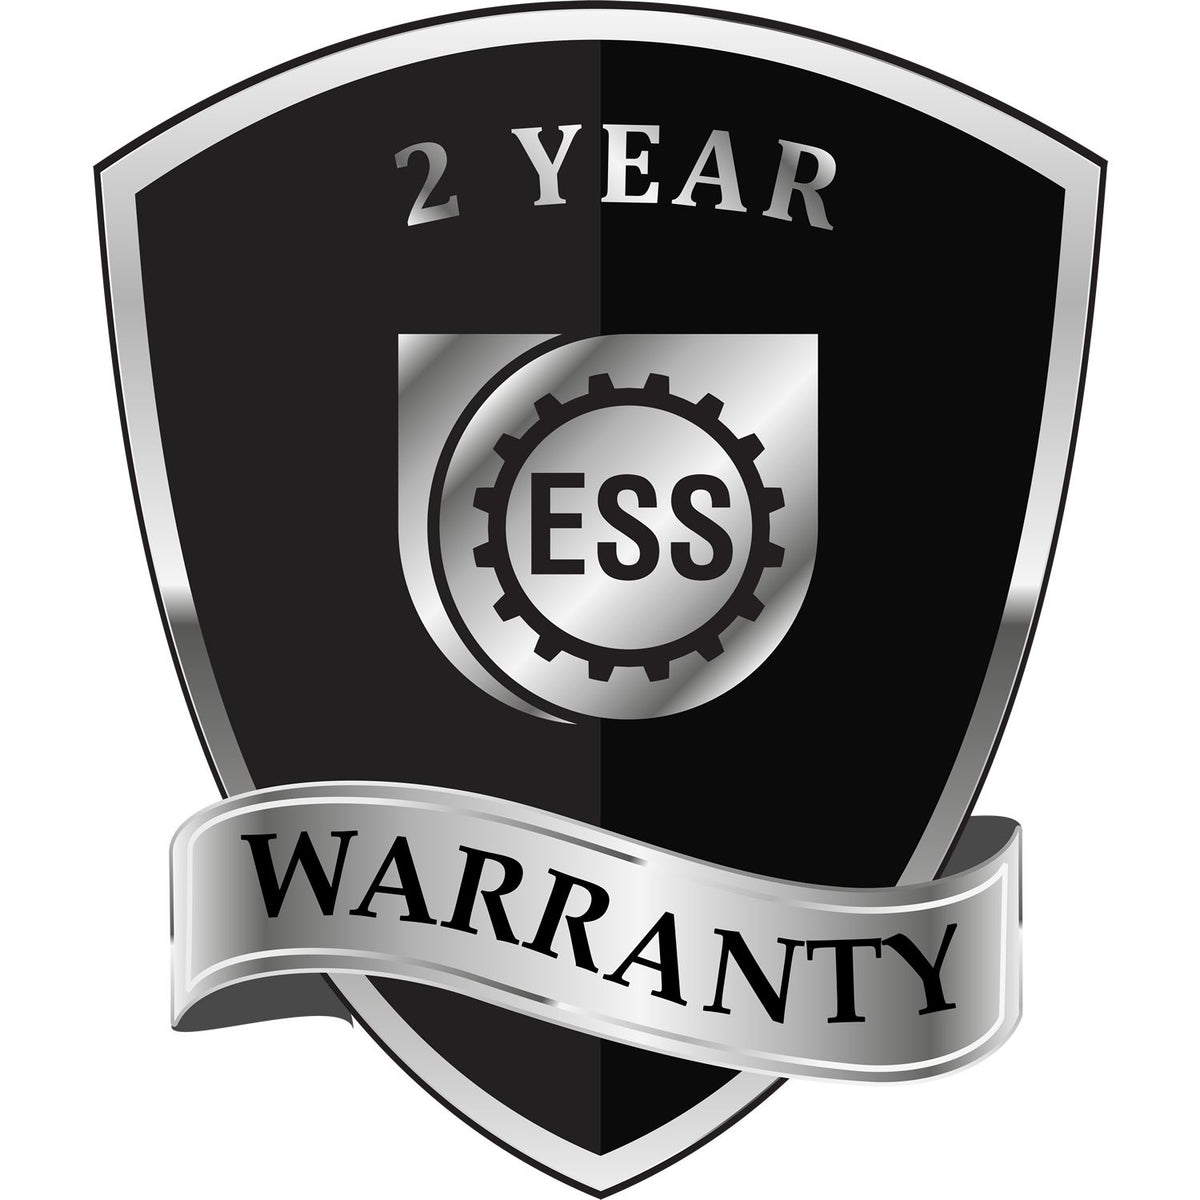 A badge or emblem showing a warranty icon for the South Dakota Desk Architect Embossing Seal